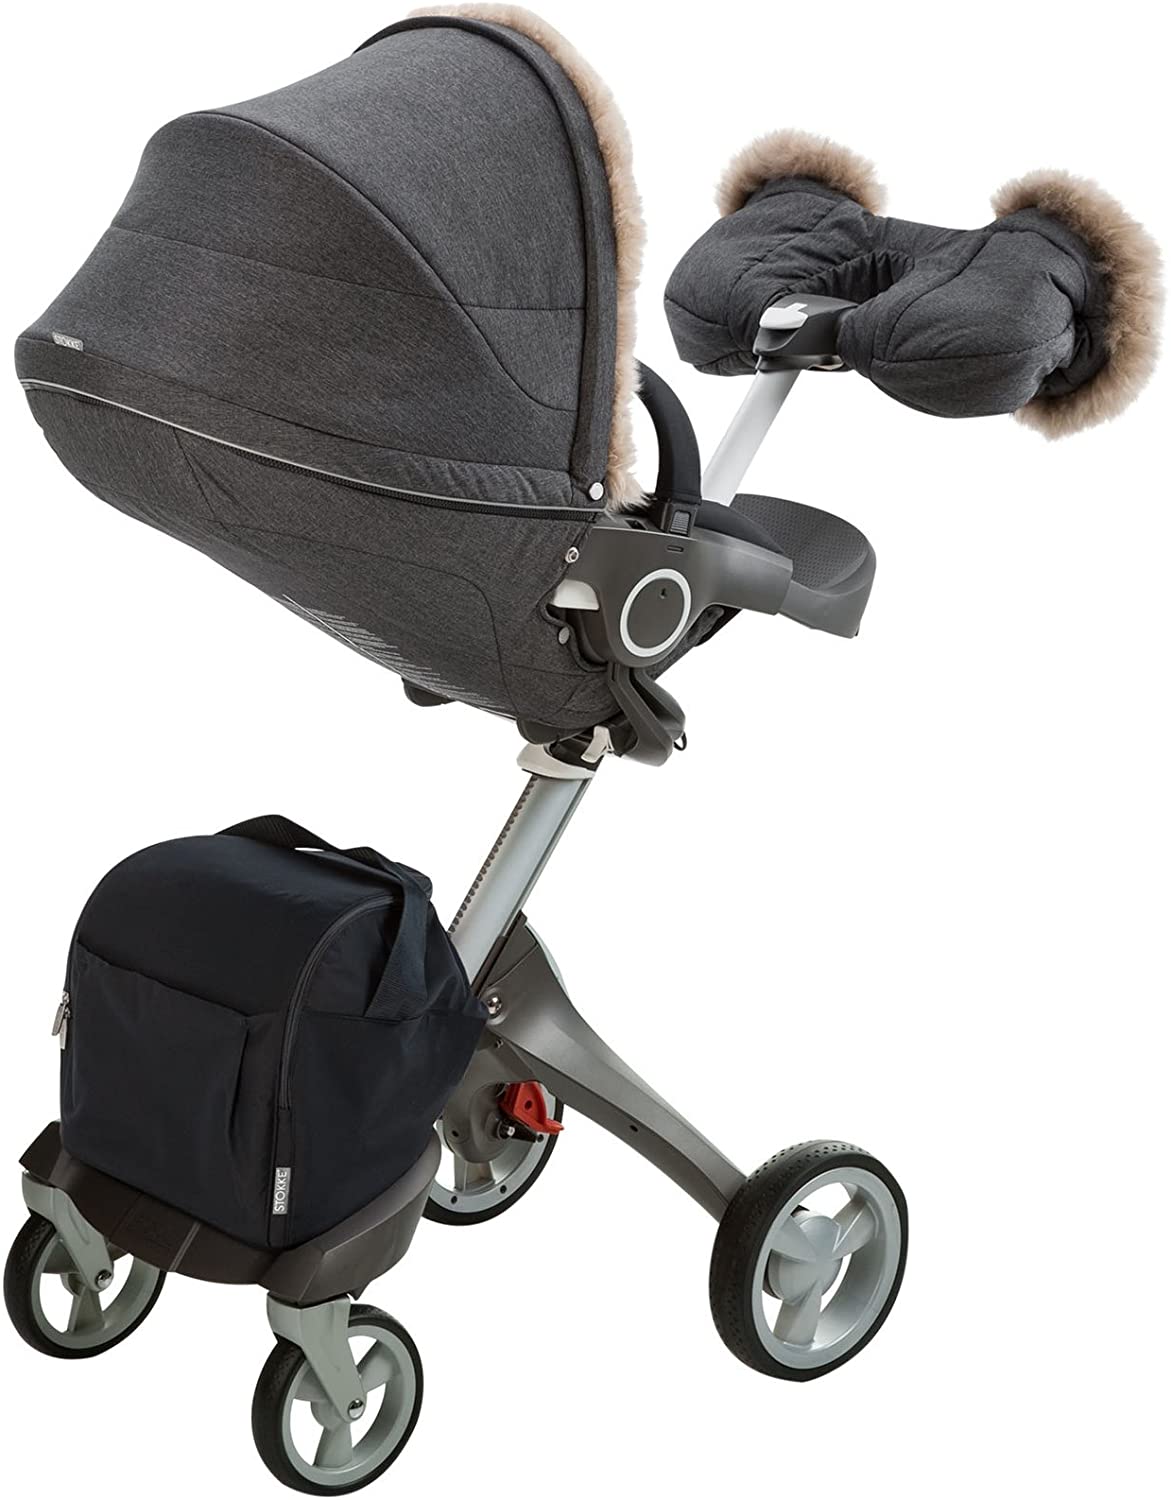 STOKKE Xplory Winter Kit - Anthracite Melange - ANB Baby -POS_Completed